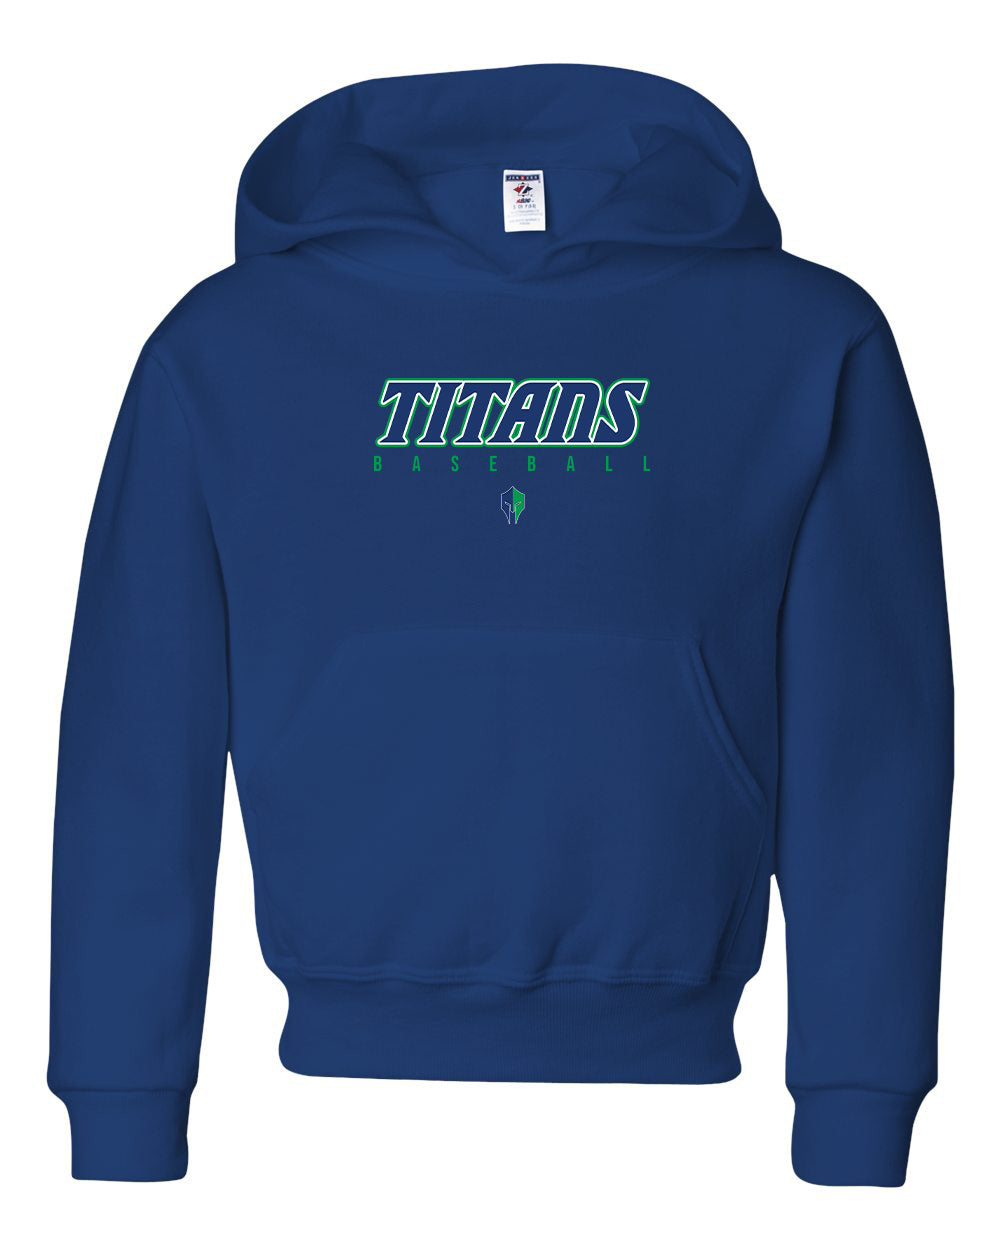 Titans Youth Hoodie "TB" - 996Y (color options available)